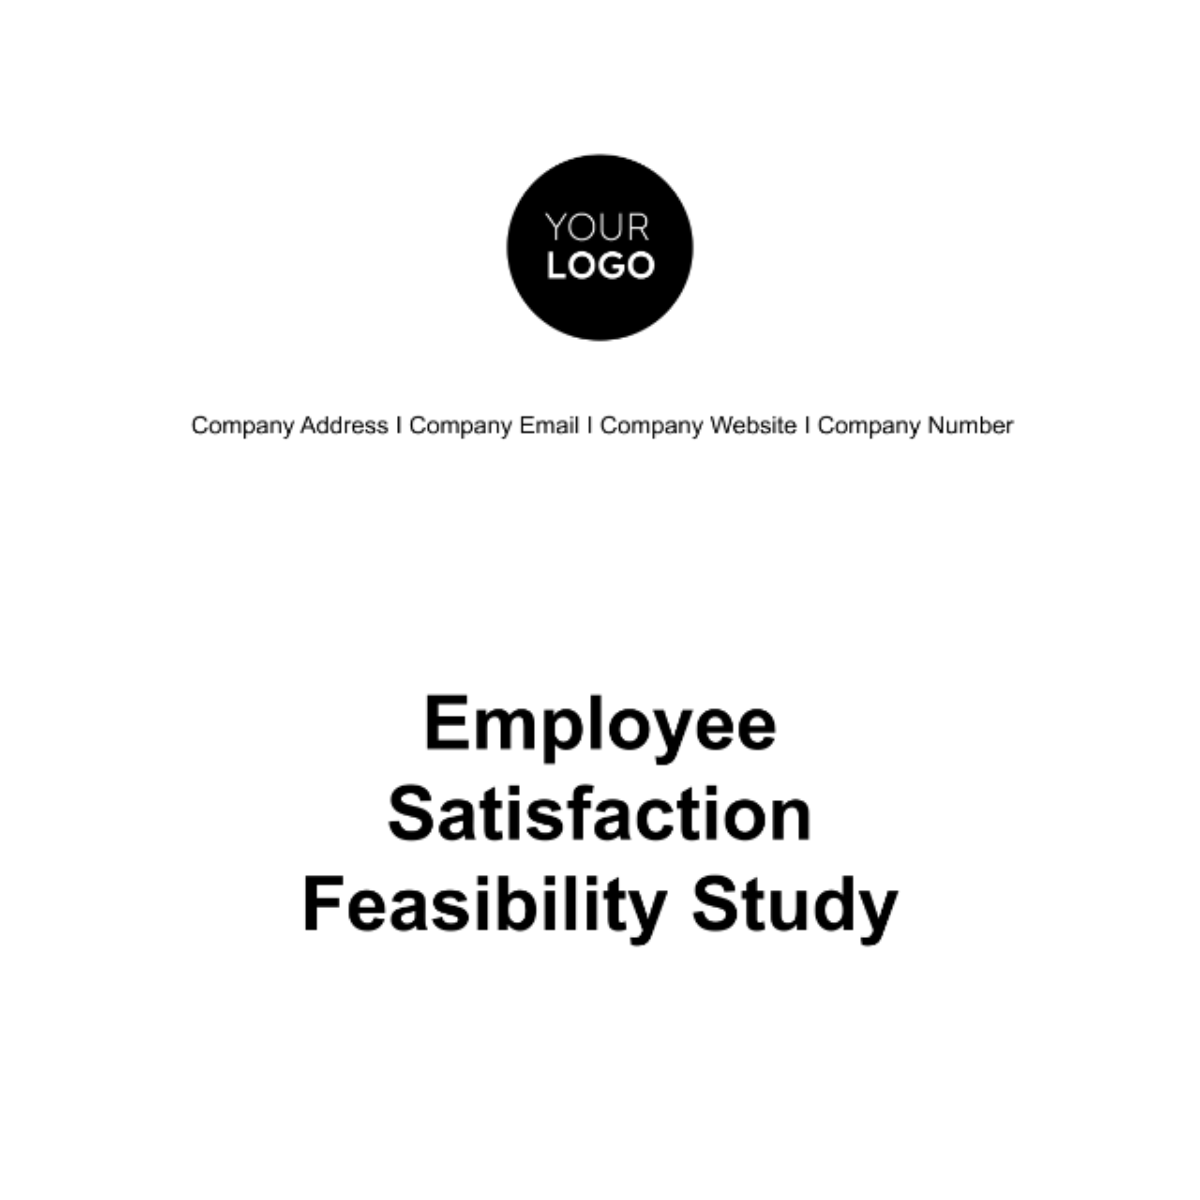 Free Employee Satisfaction Feasibility Study HR Template